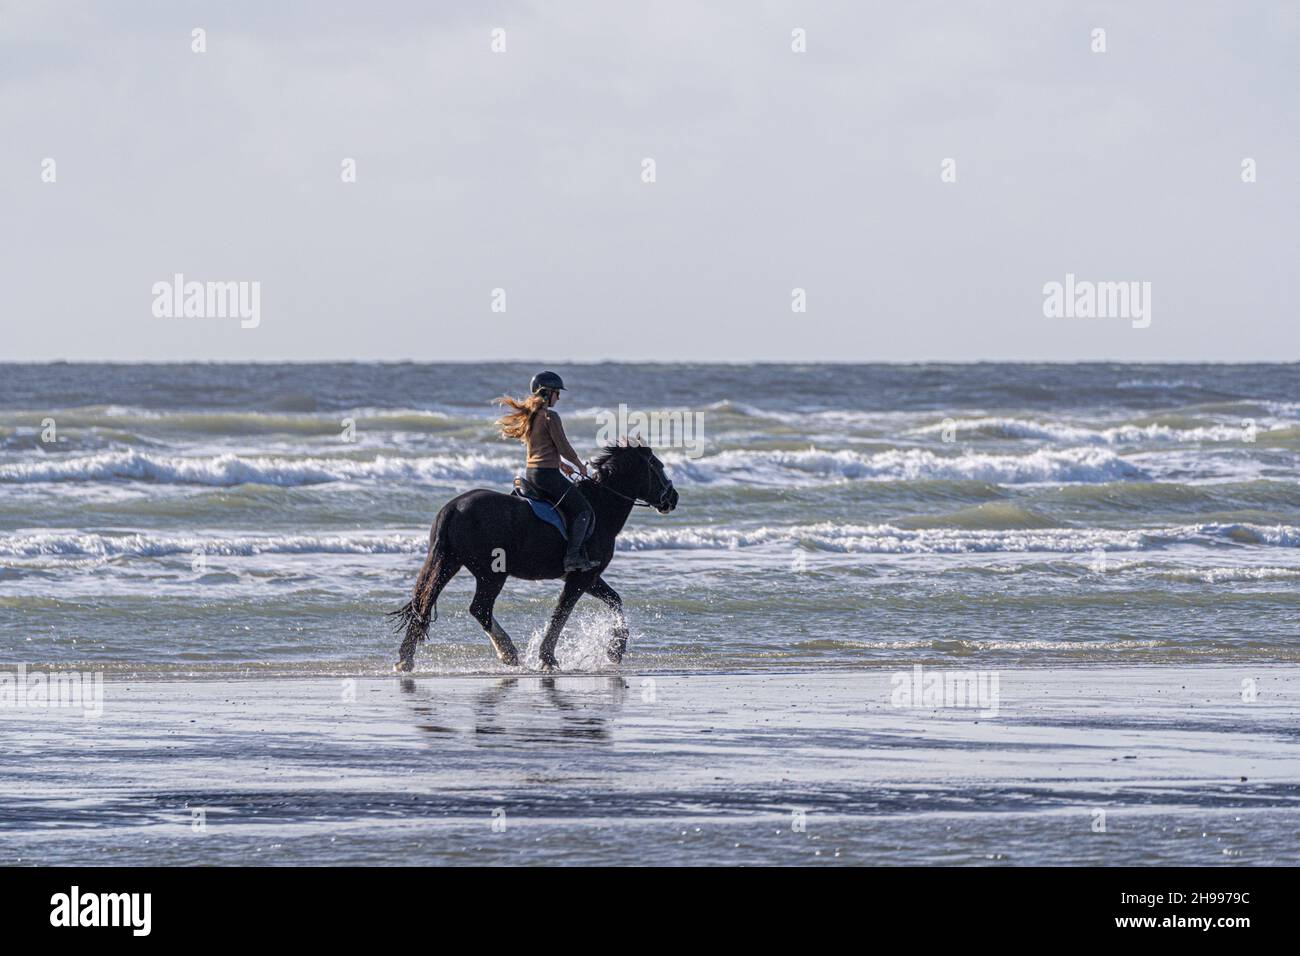 A young person with flowing hair, horse riding on the edge of the water on West Wittering beach in West Sussex Stock Photo